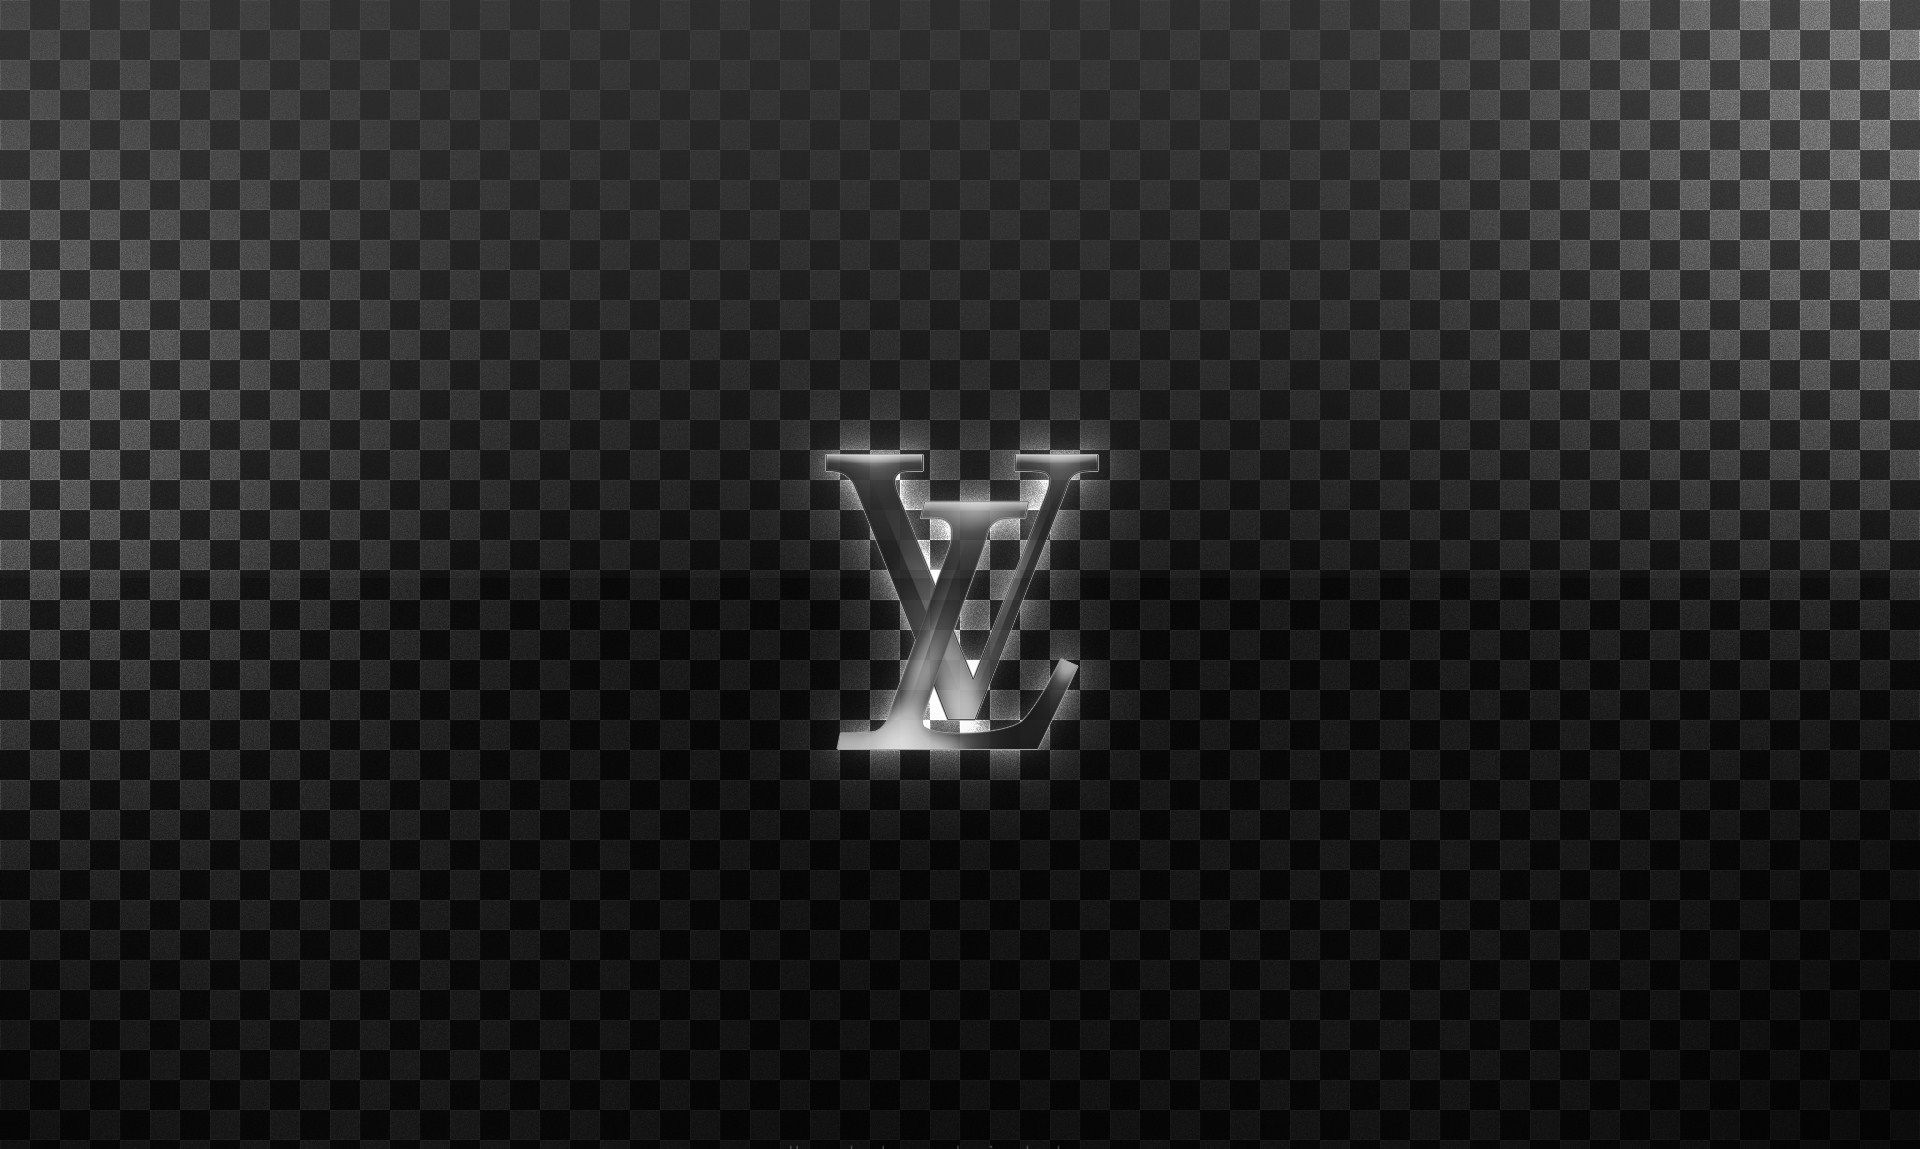 Download Louis Vuitton wallpaper by jxgaming231 - ad - Free on